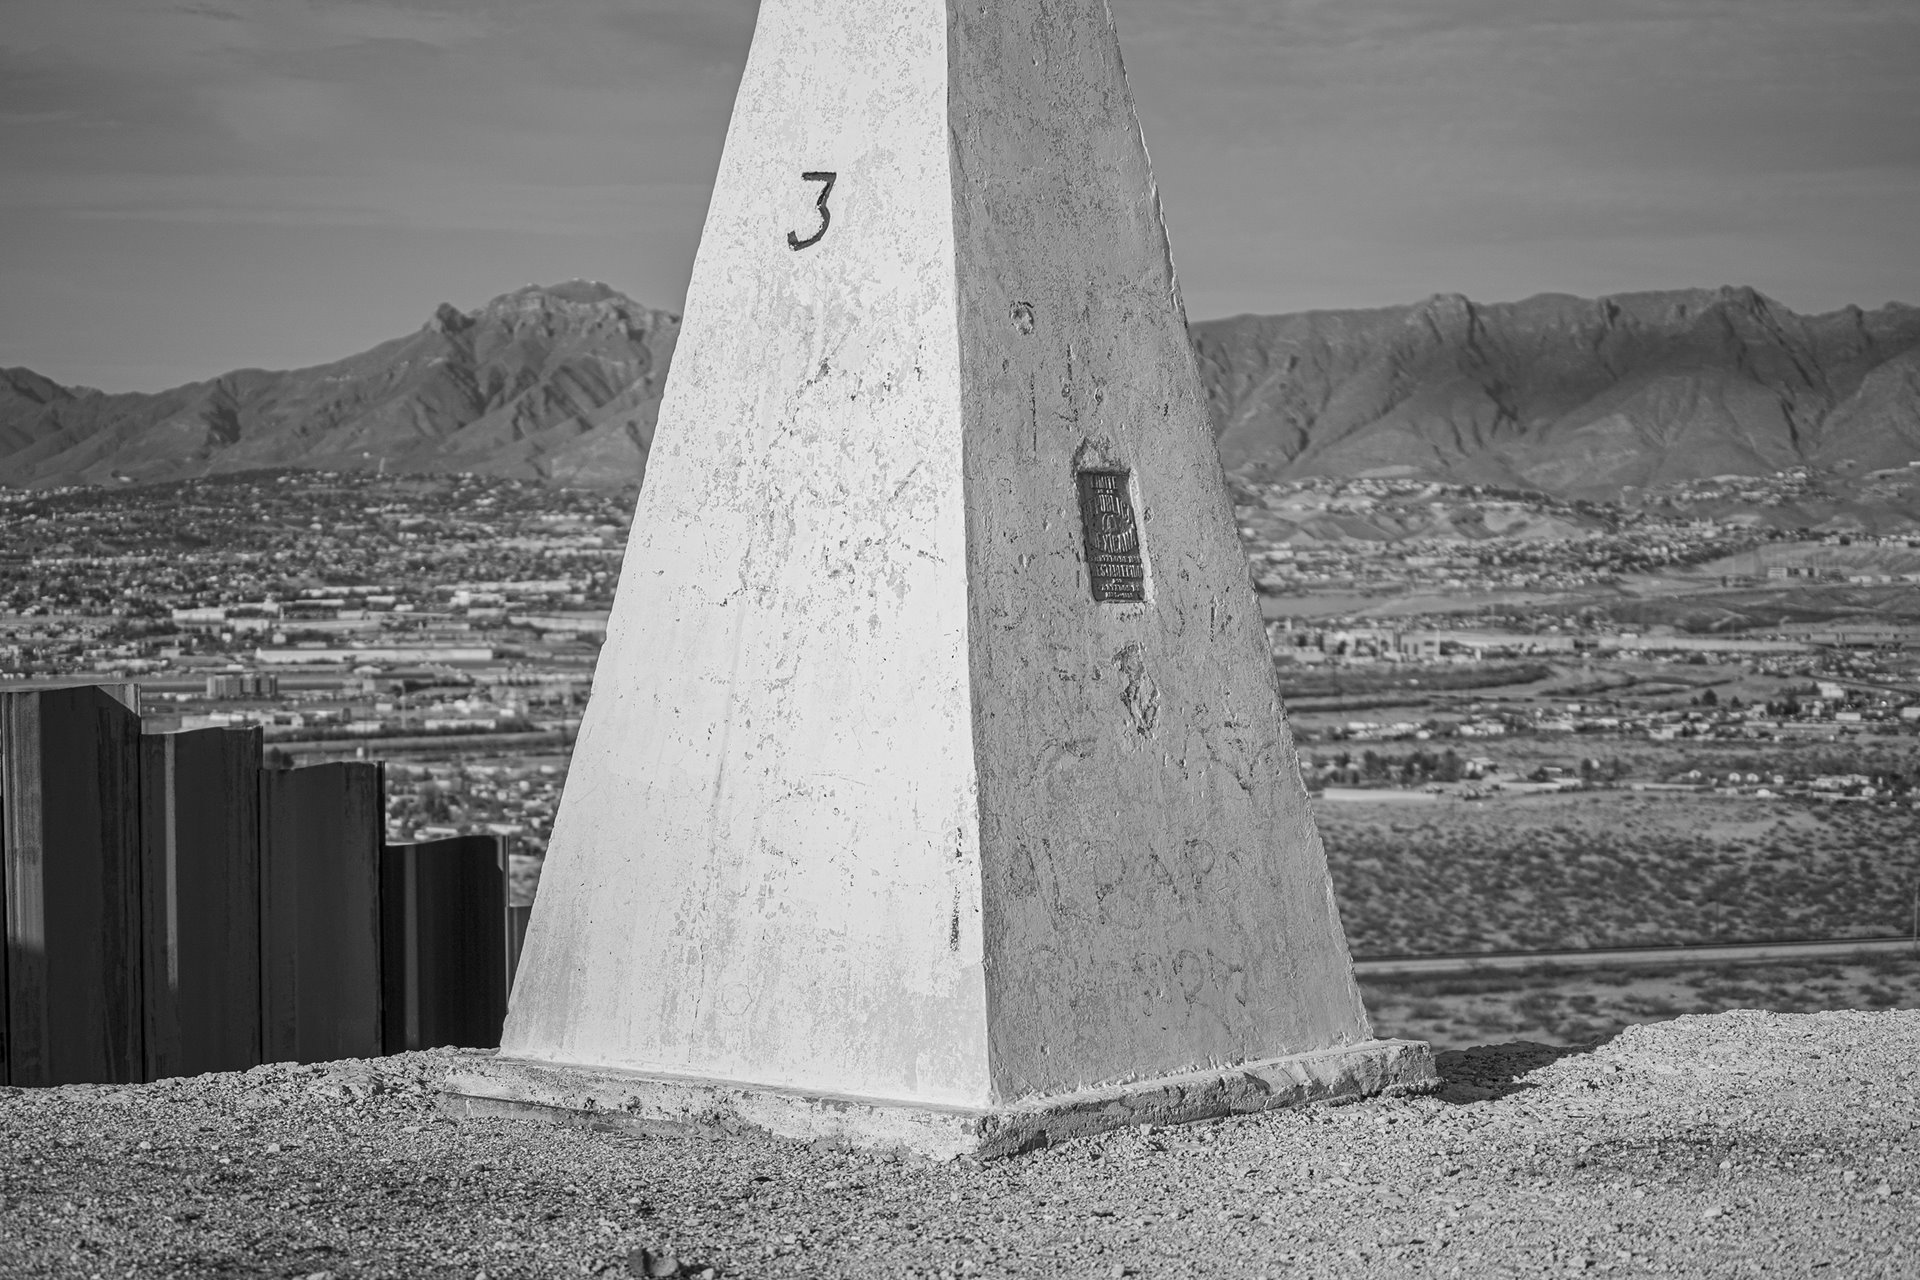 A monolith marks the international border between Mexico and the United States in Juárez, Mexico. These structures were built at the end of the 19th century, after the Mexican-American War, in which Mexico lost 55% of its land to the United States. Along the border, some of these markers stand alongside steel and concrete barriers, and in other places they can be found next to cattle fences, dirt roads, or open countryside.